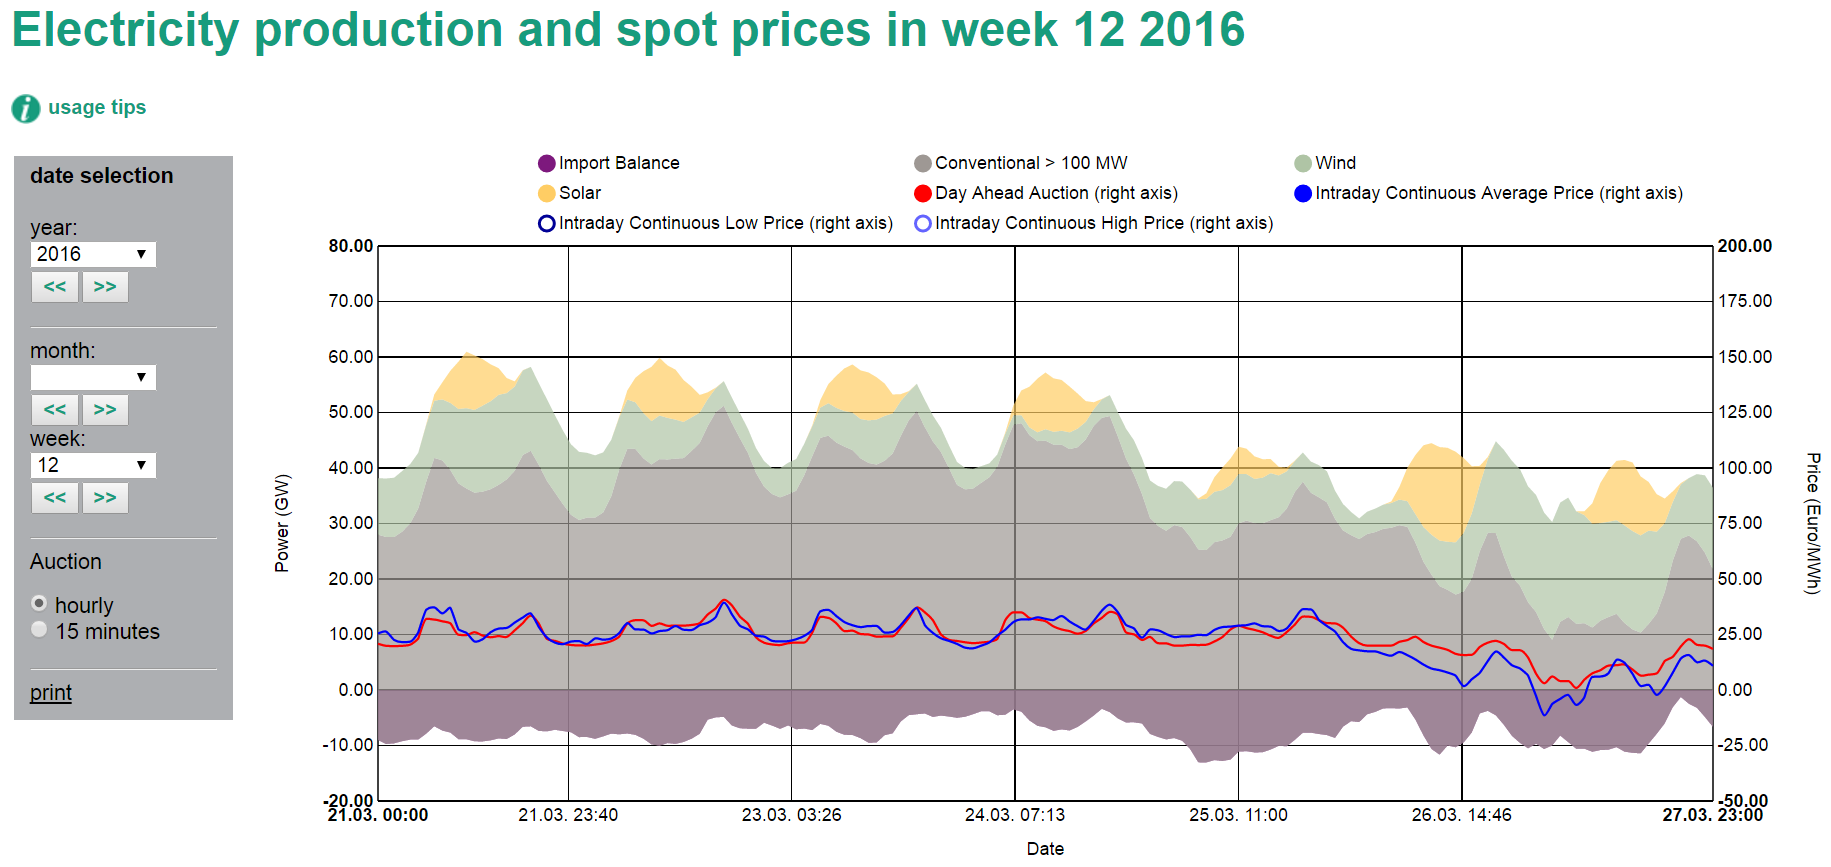 A graphic which shows the electricity production and spot prices in week 12 of 2016 